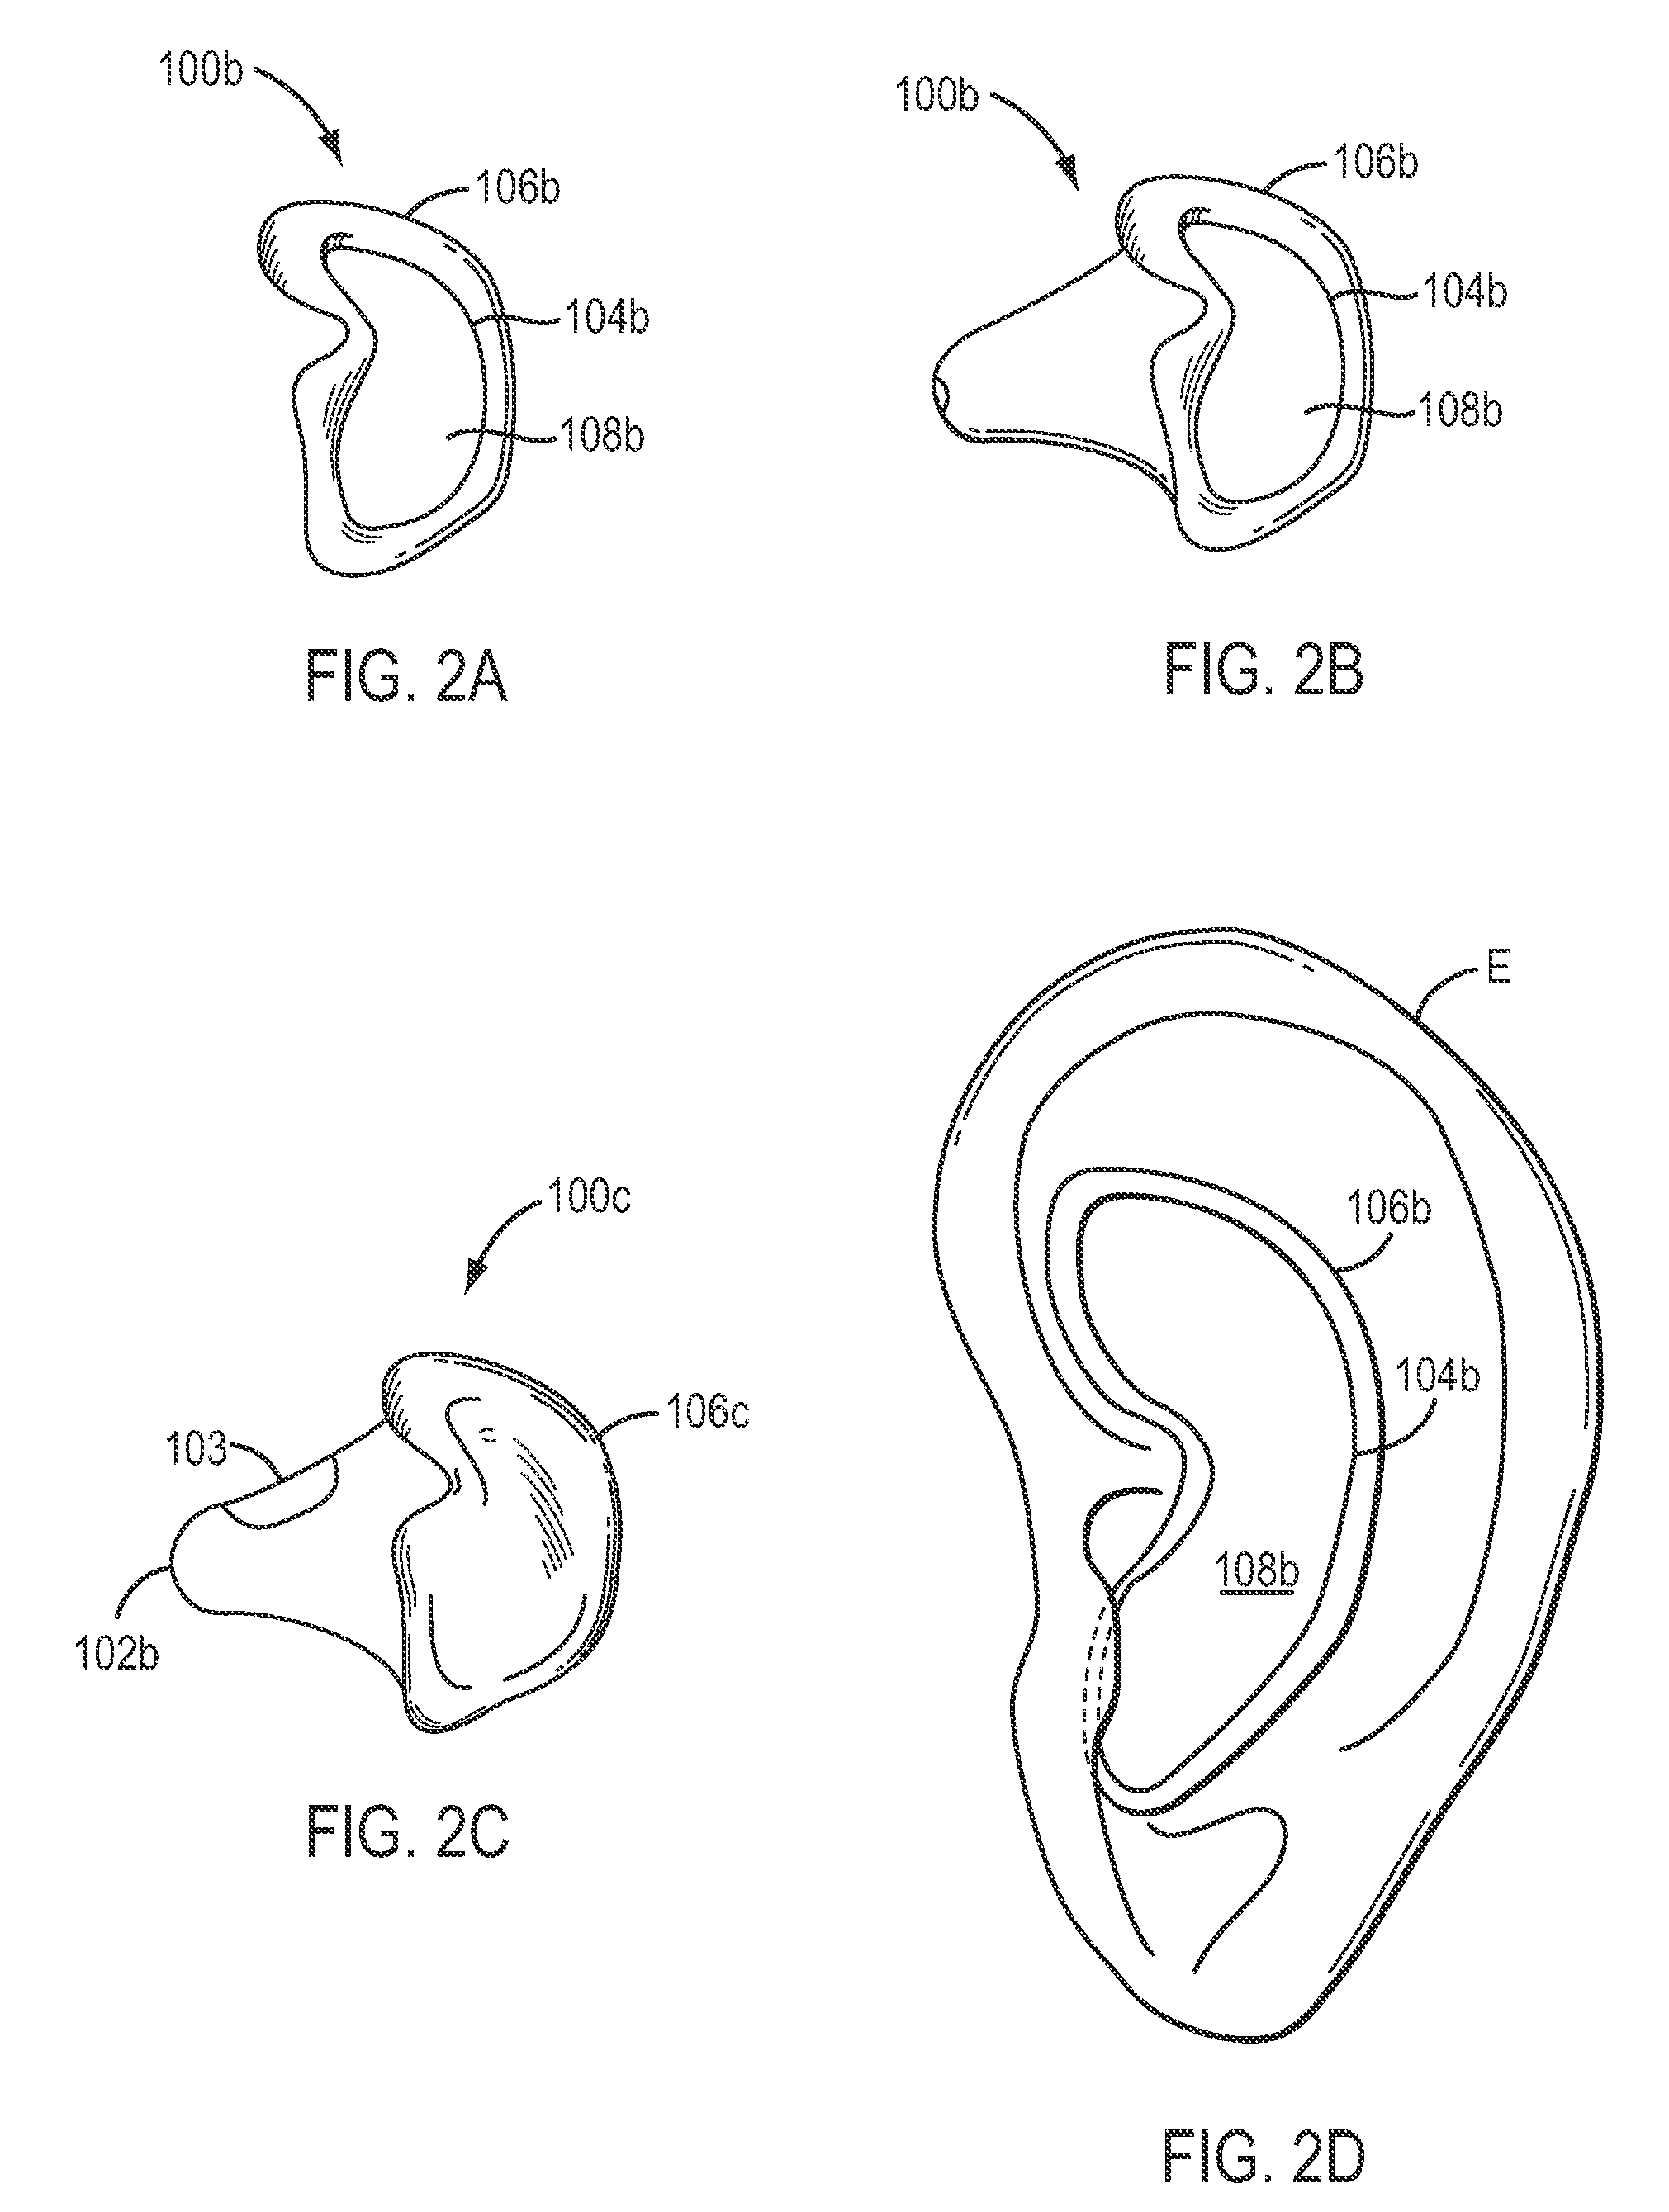 Ear plug devices, methods and kits for the induction and maintenance of quality of sleep